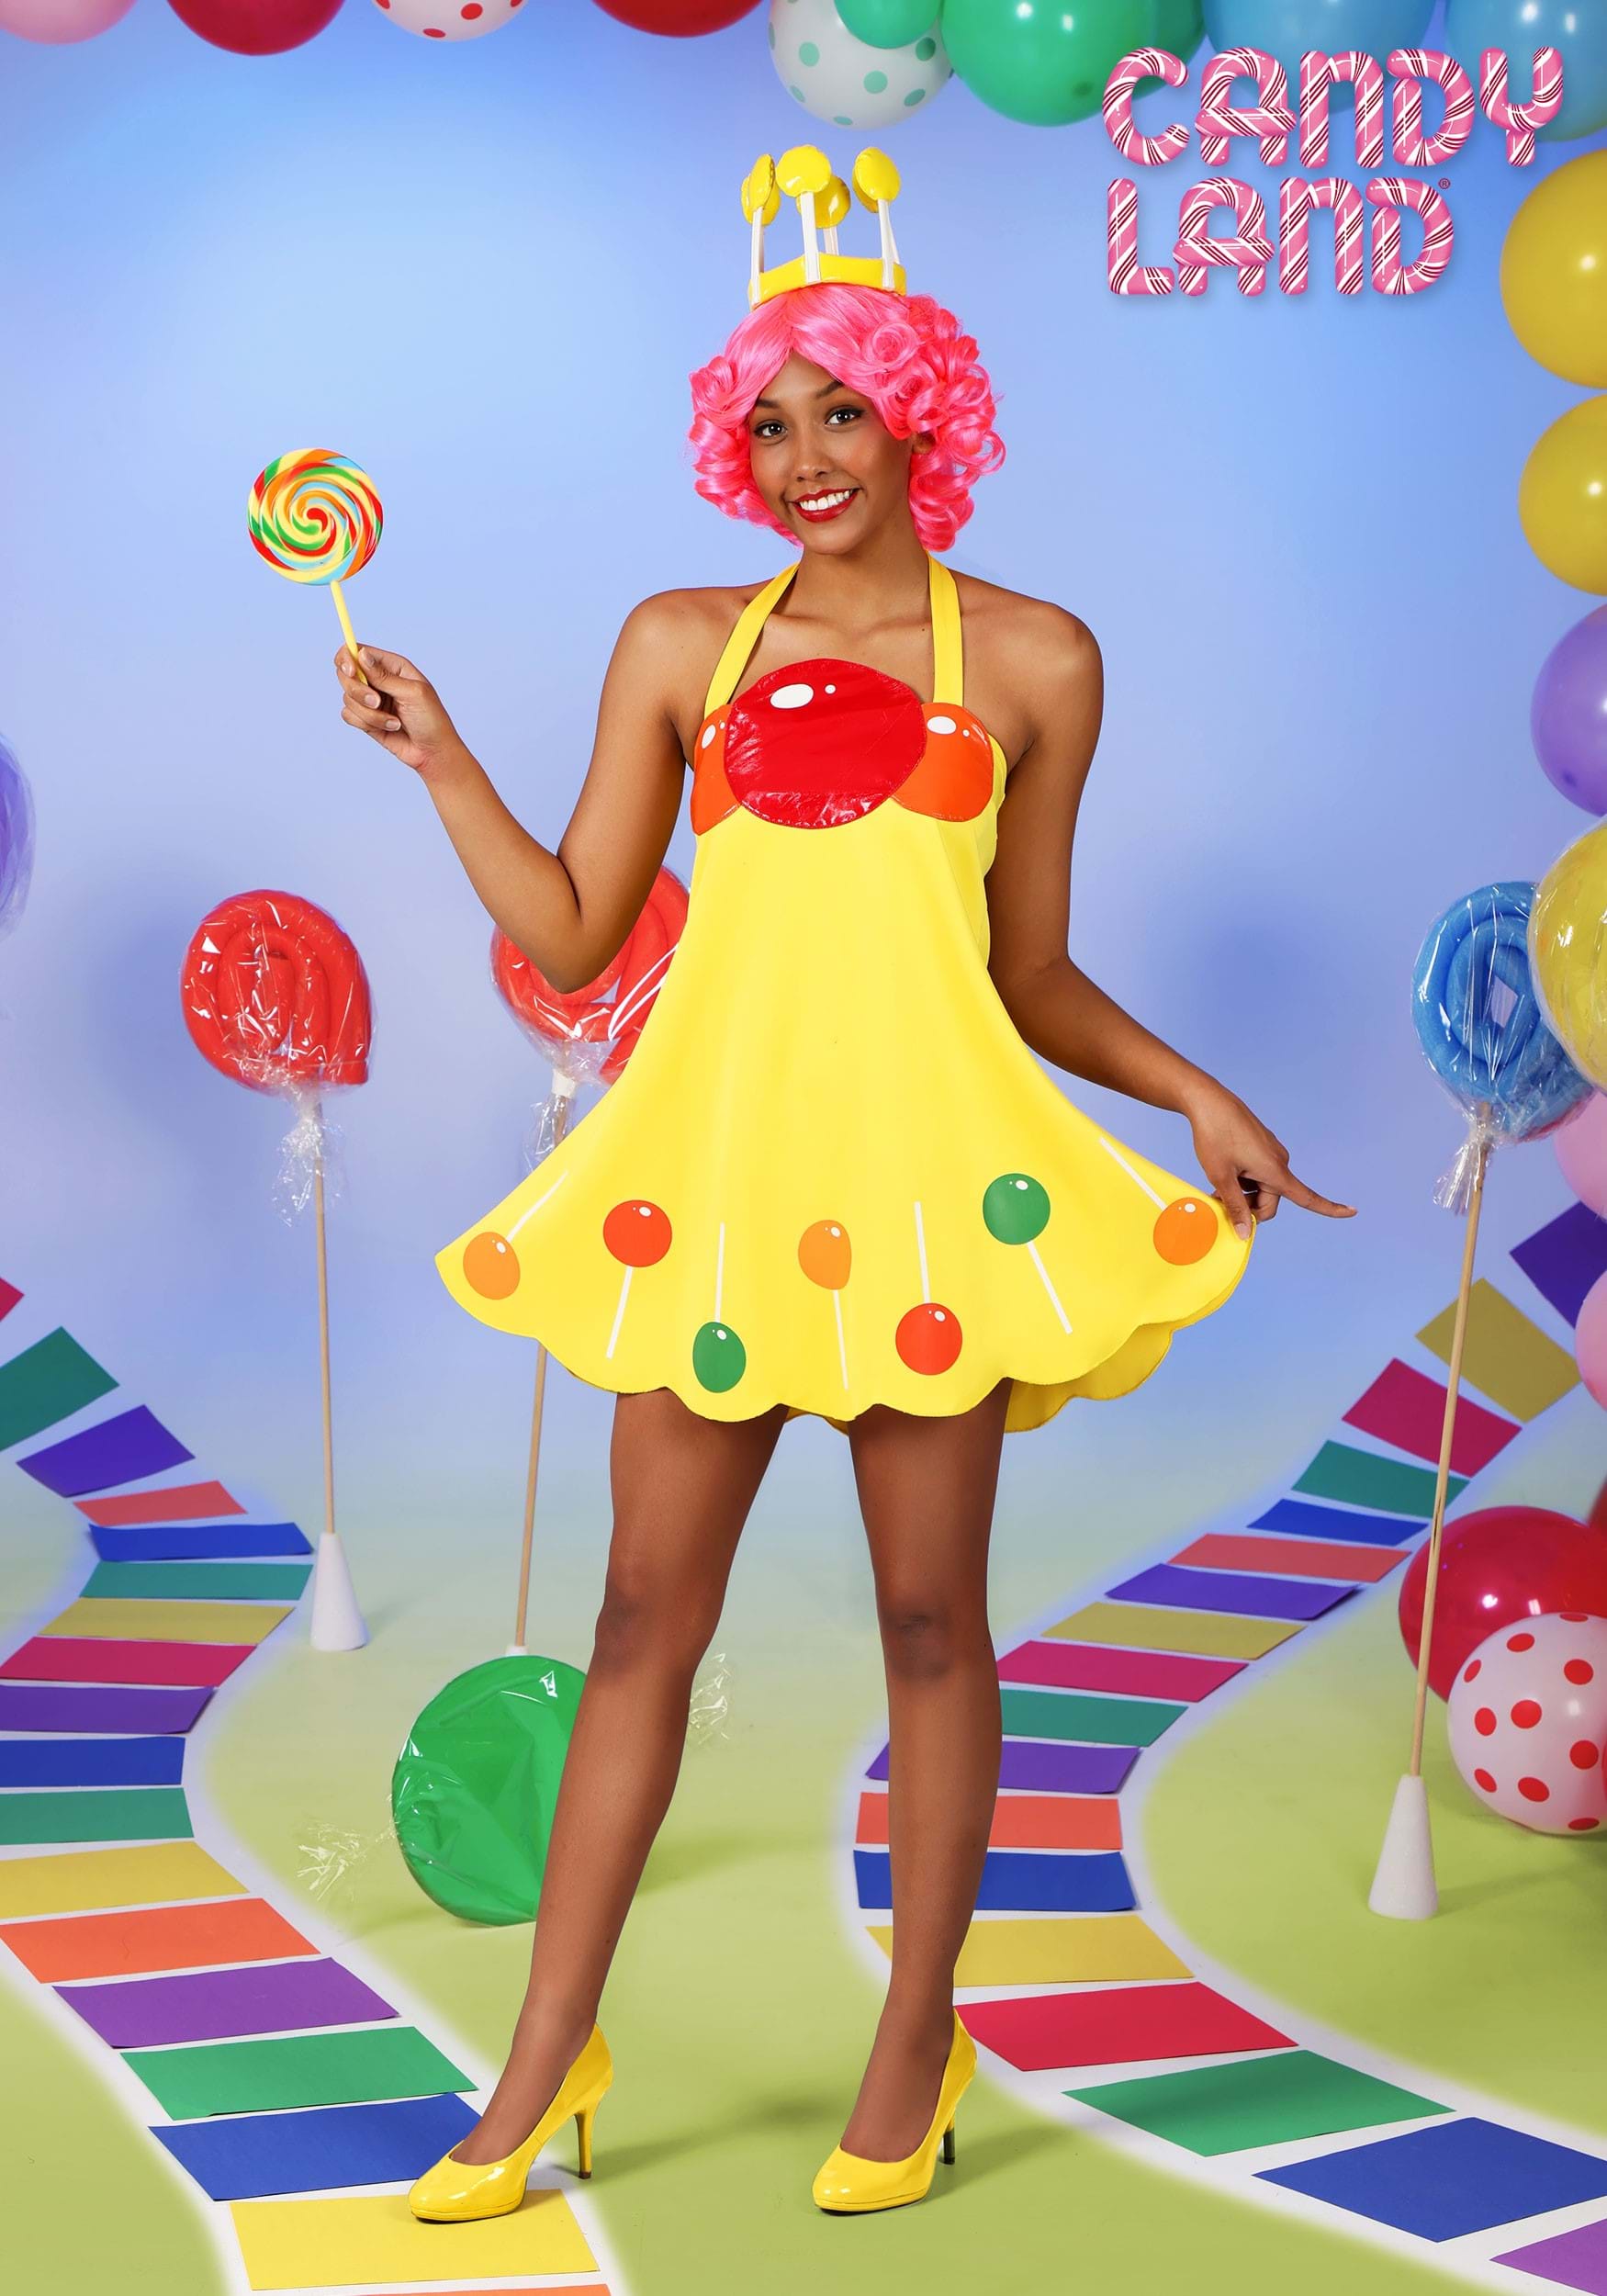 Princess lolly from candyland